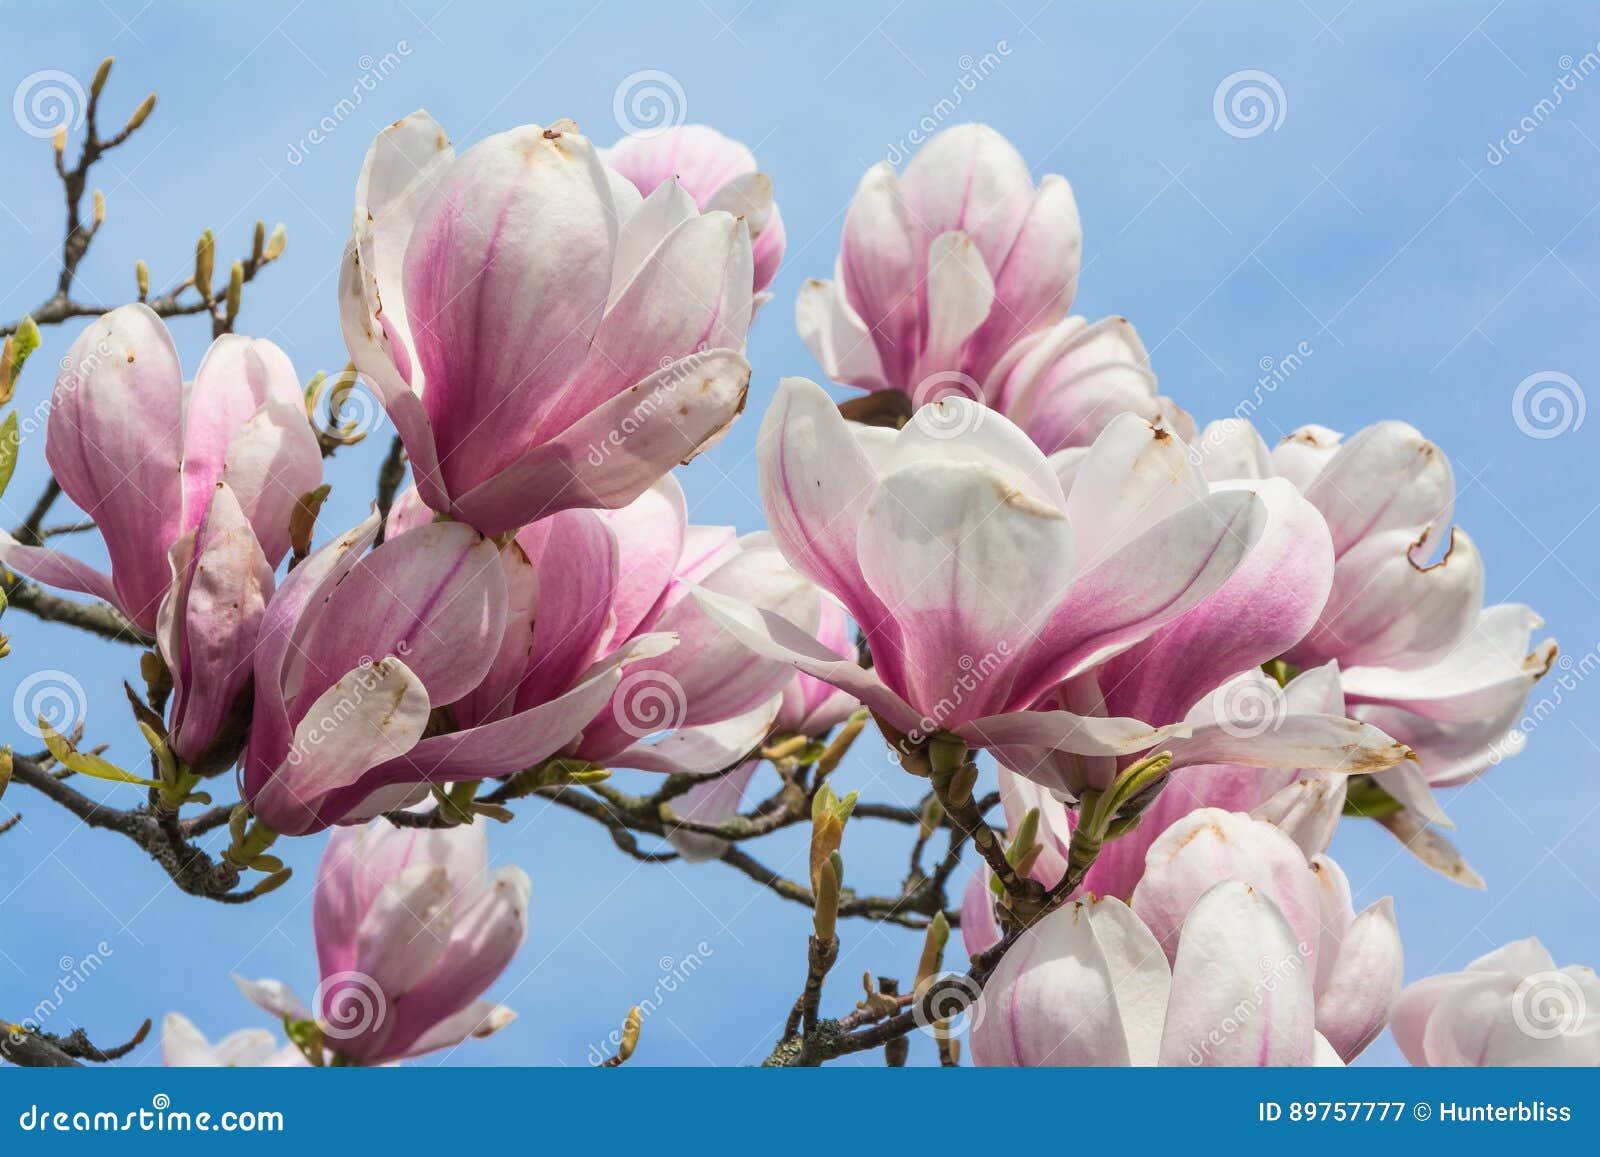 Magnolias Blooming on Blue Sky Background Beautiful Plants Real Stock ...